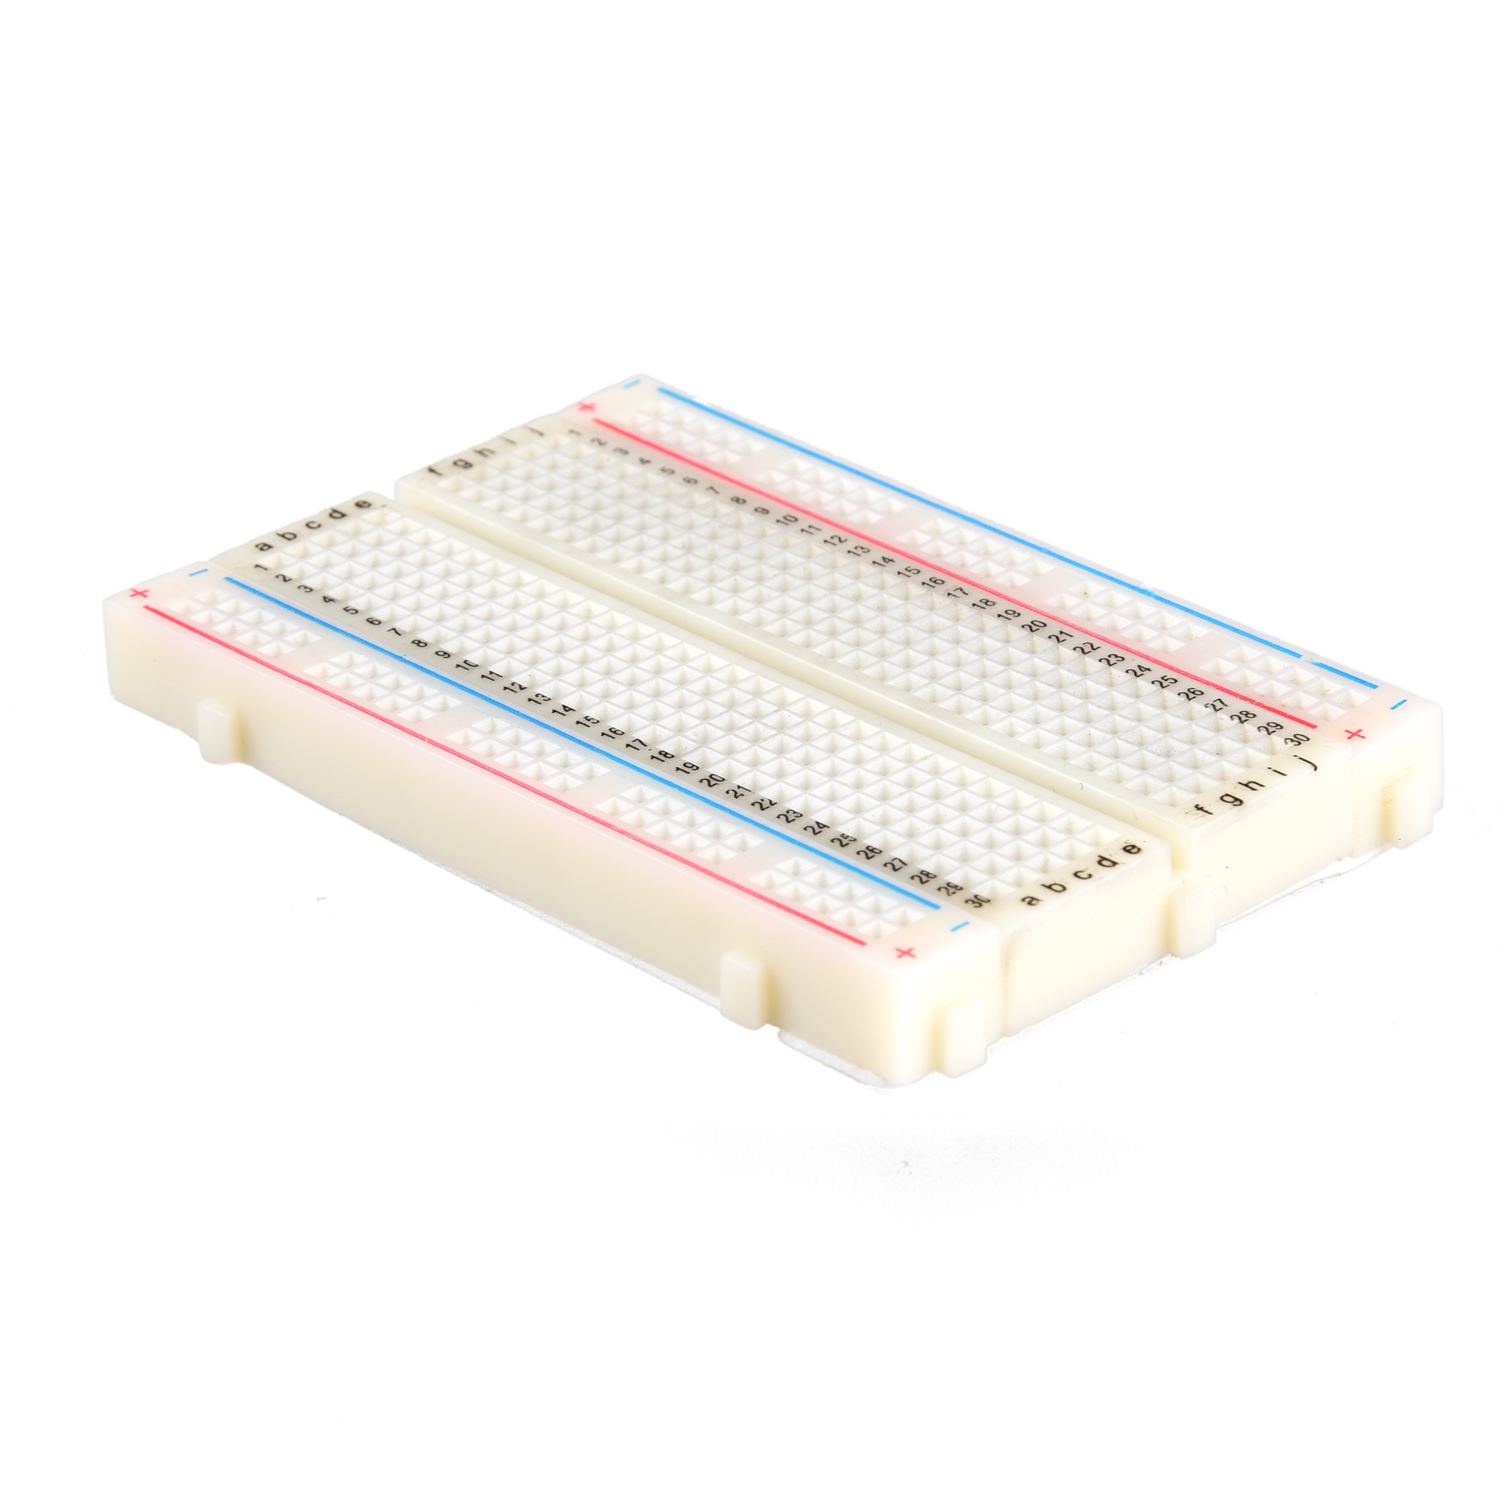 Top quality Breadboard Experiment Board Breadboard 400 Contacts